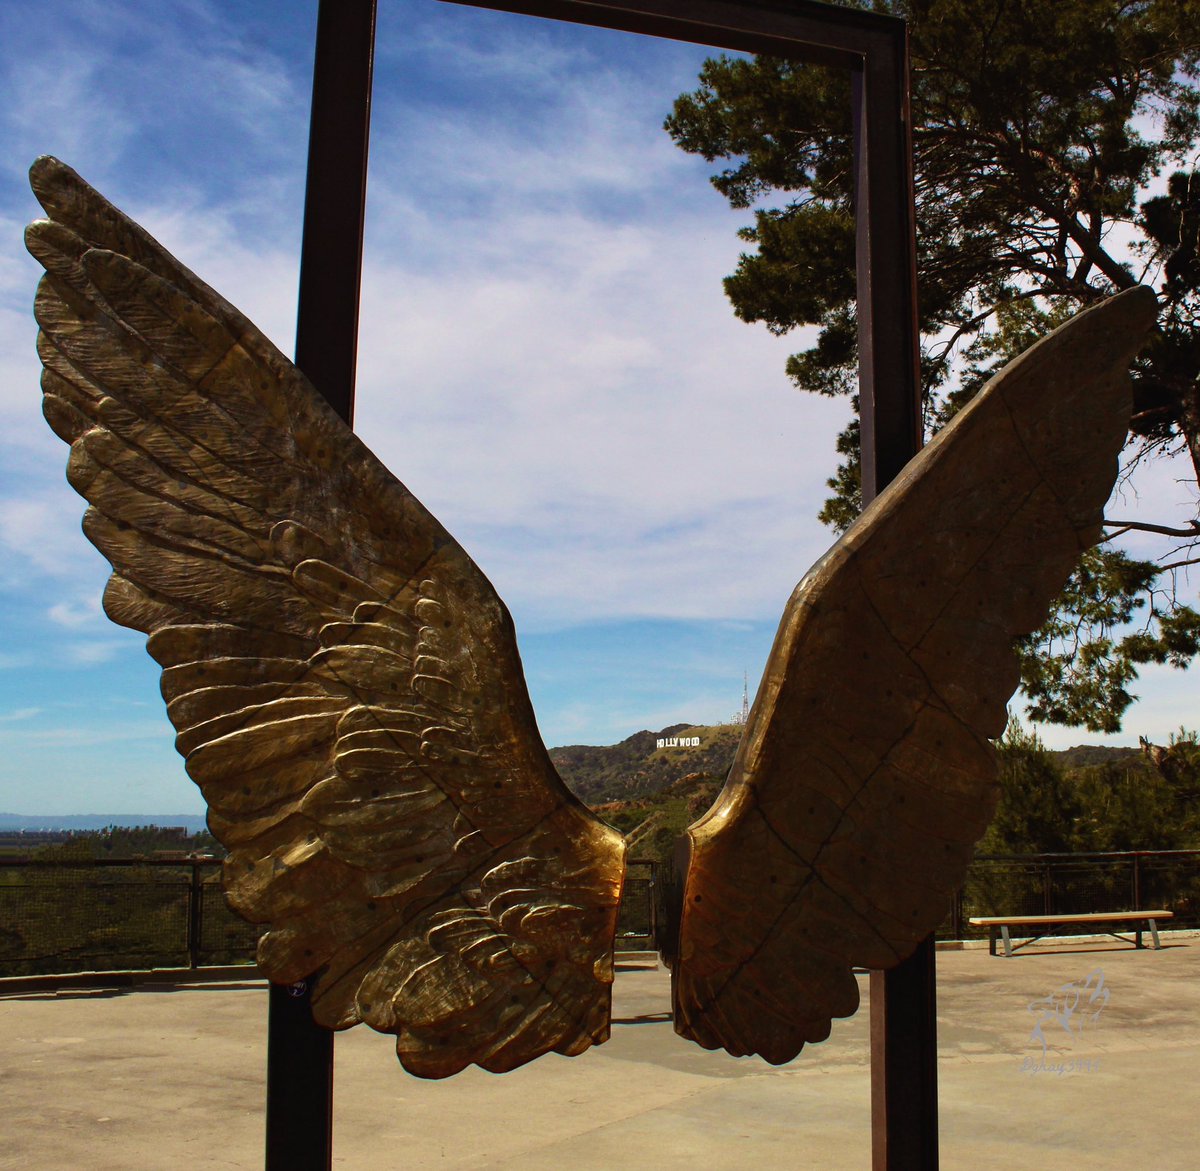 Wings
#hollywoodsign #photography